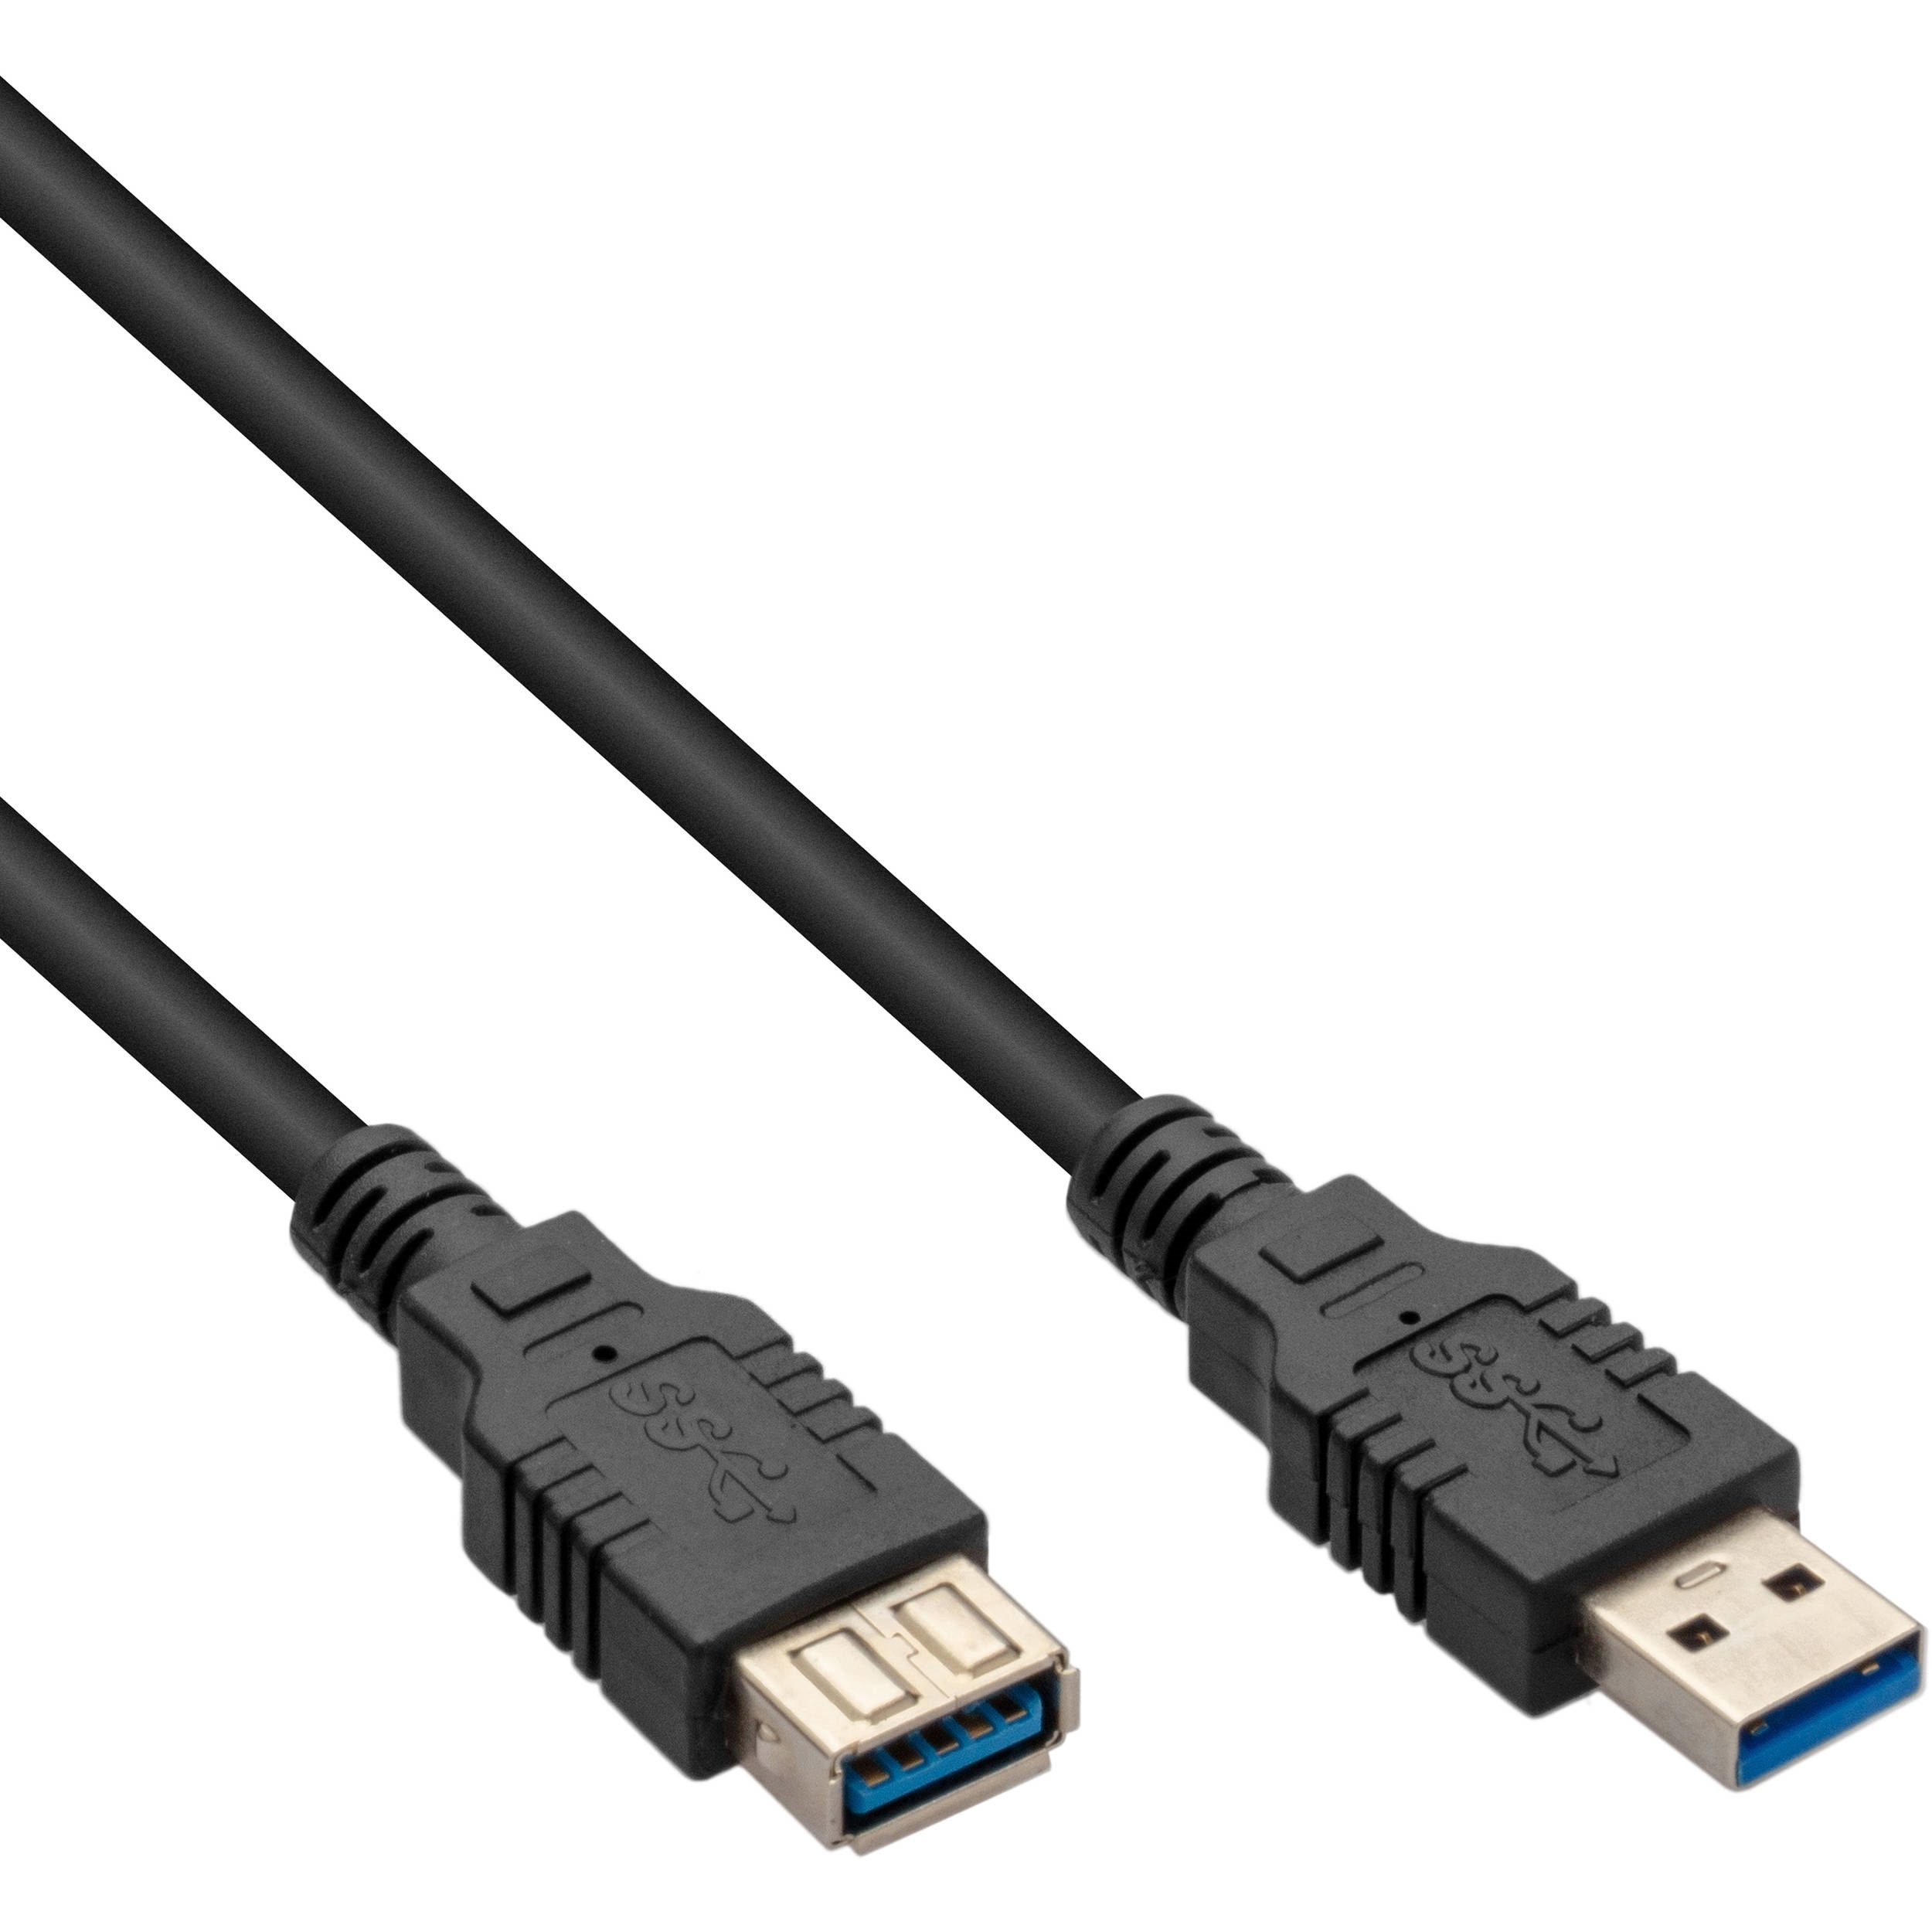 Pearstone USB 3.0 Type A Male to Type A Female Extension Cable - 3'